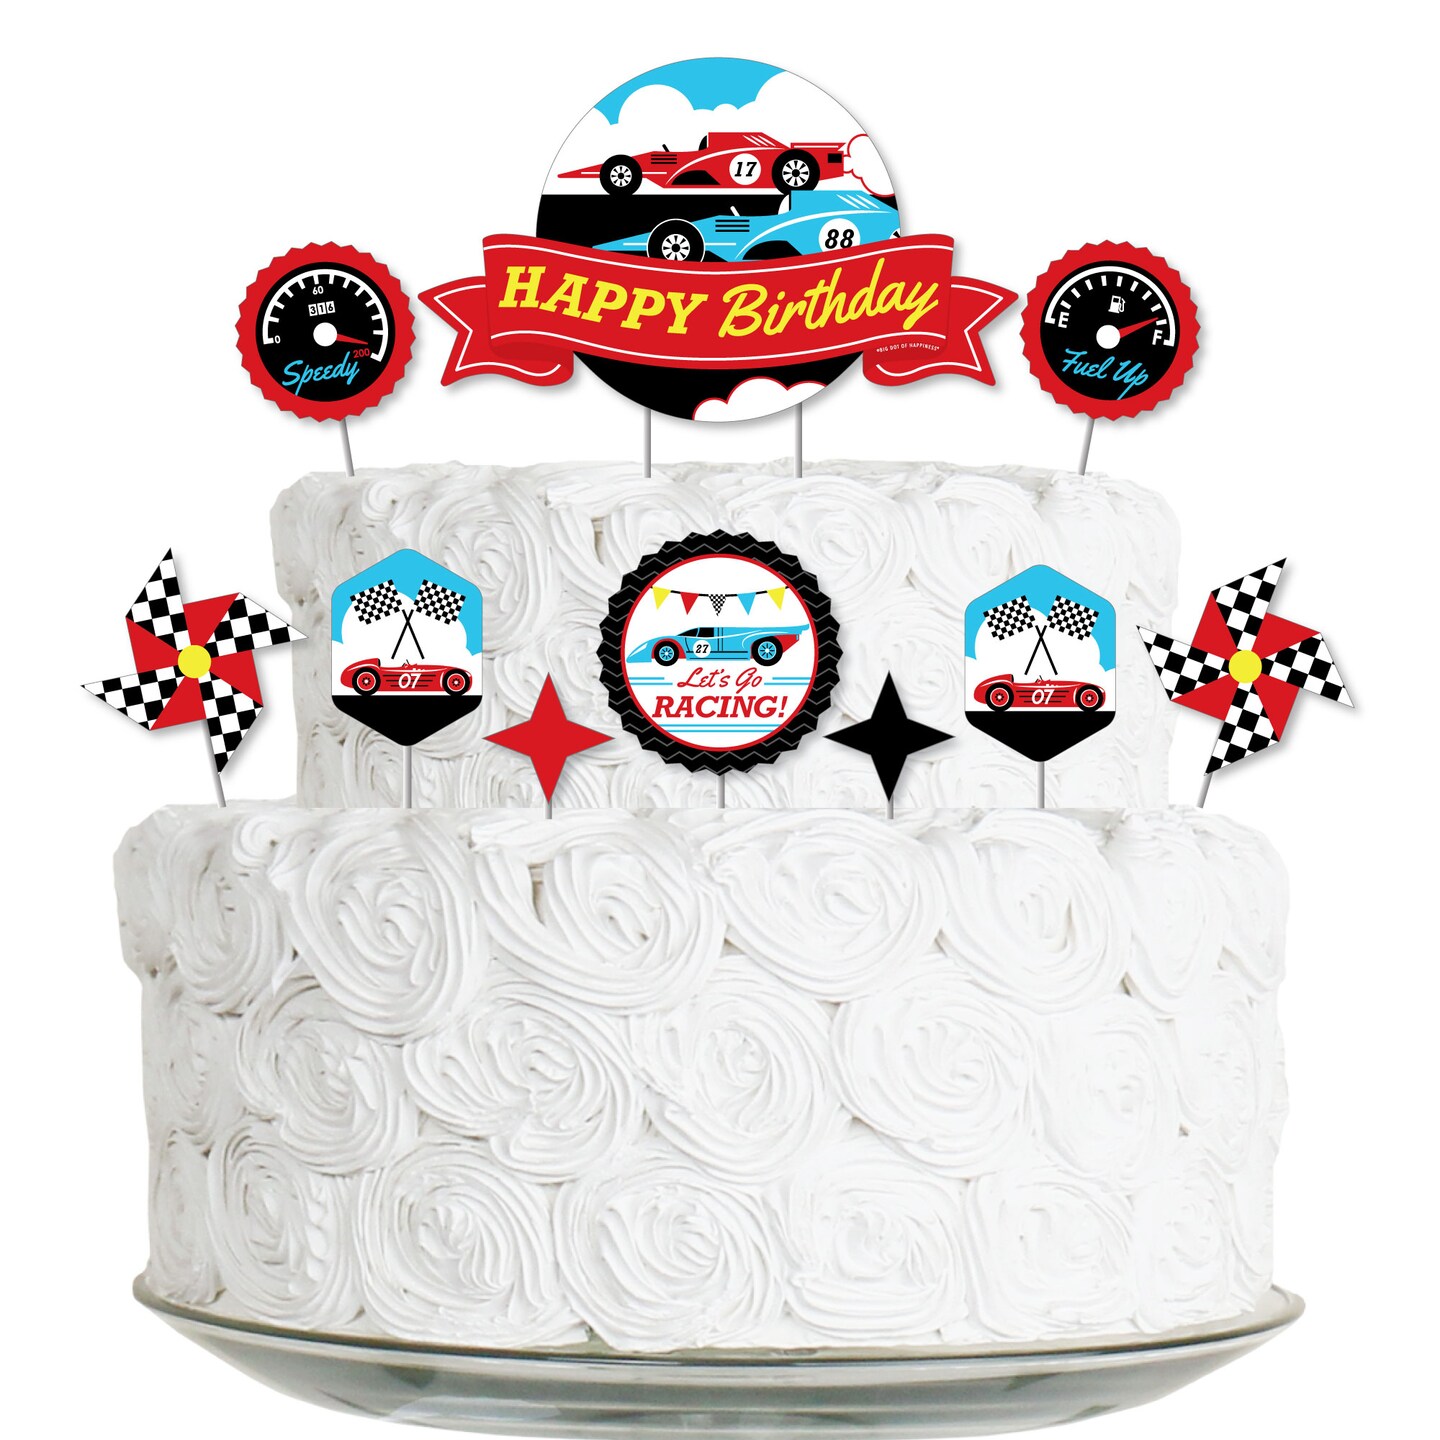 race track car birthday cake for kids design ideas decorating tutorial  classes courses video at home - YouTube